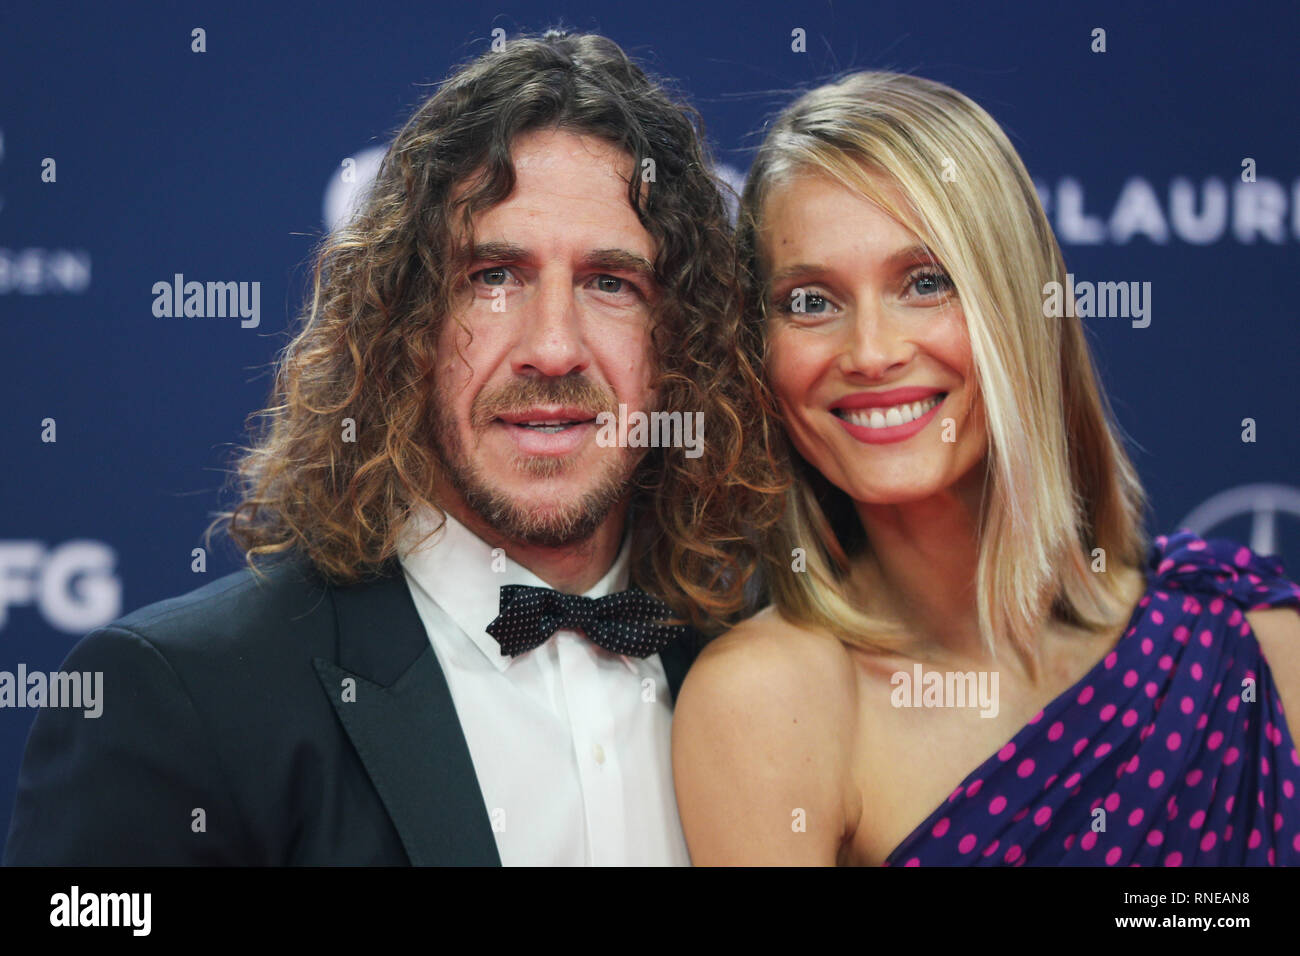 Monaco. 18th Feb, 2019. Spainish football player Carles Puyol and his wife Vanessa Lorenzo pose on the red carpet at the 2019 Laureus World Sports Awards ceremony in Monaco, Feb. 18, 2019. The 2019 Laureus World Sports Awards were unveiled in Monaco on Monday. Credit: Zheng Huansong/Xinhua/Alamy Live News Stock Photo